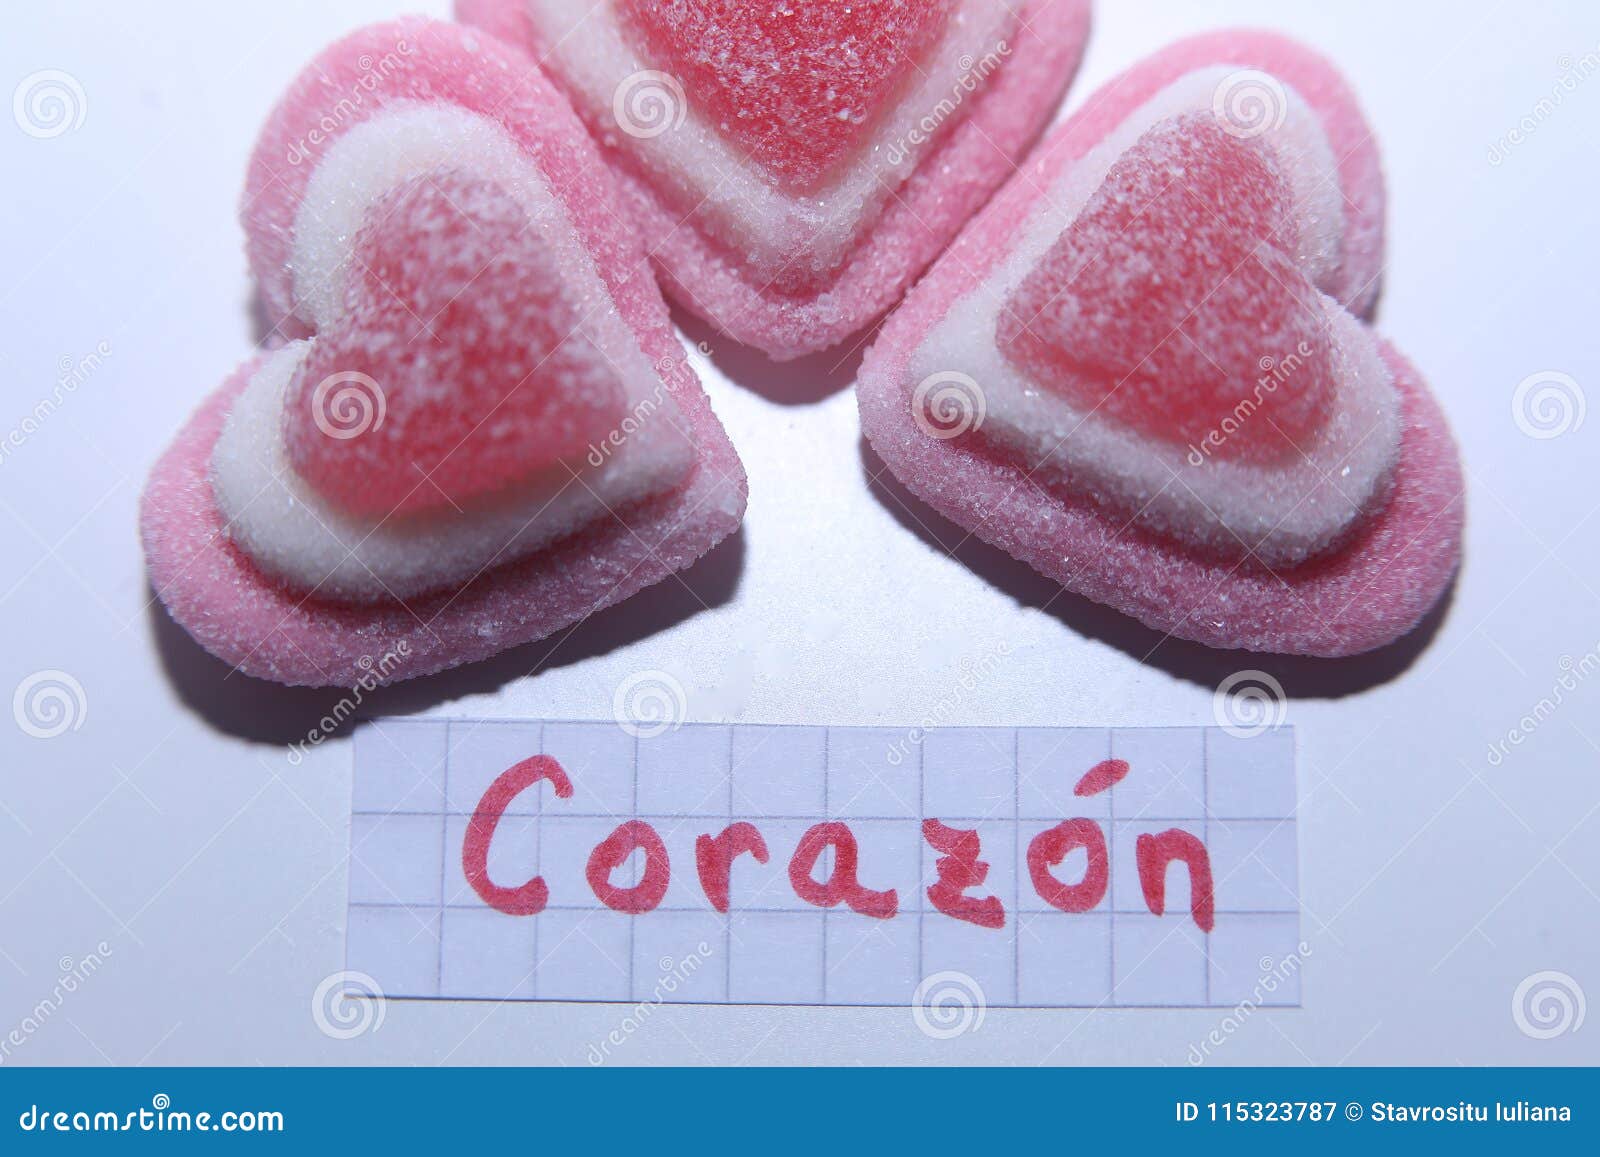 corazon word in spanish for heart in english